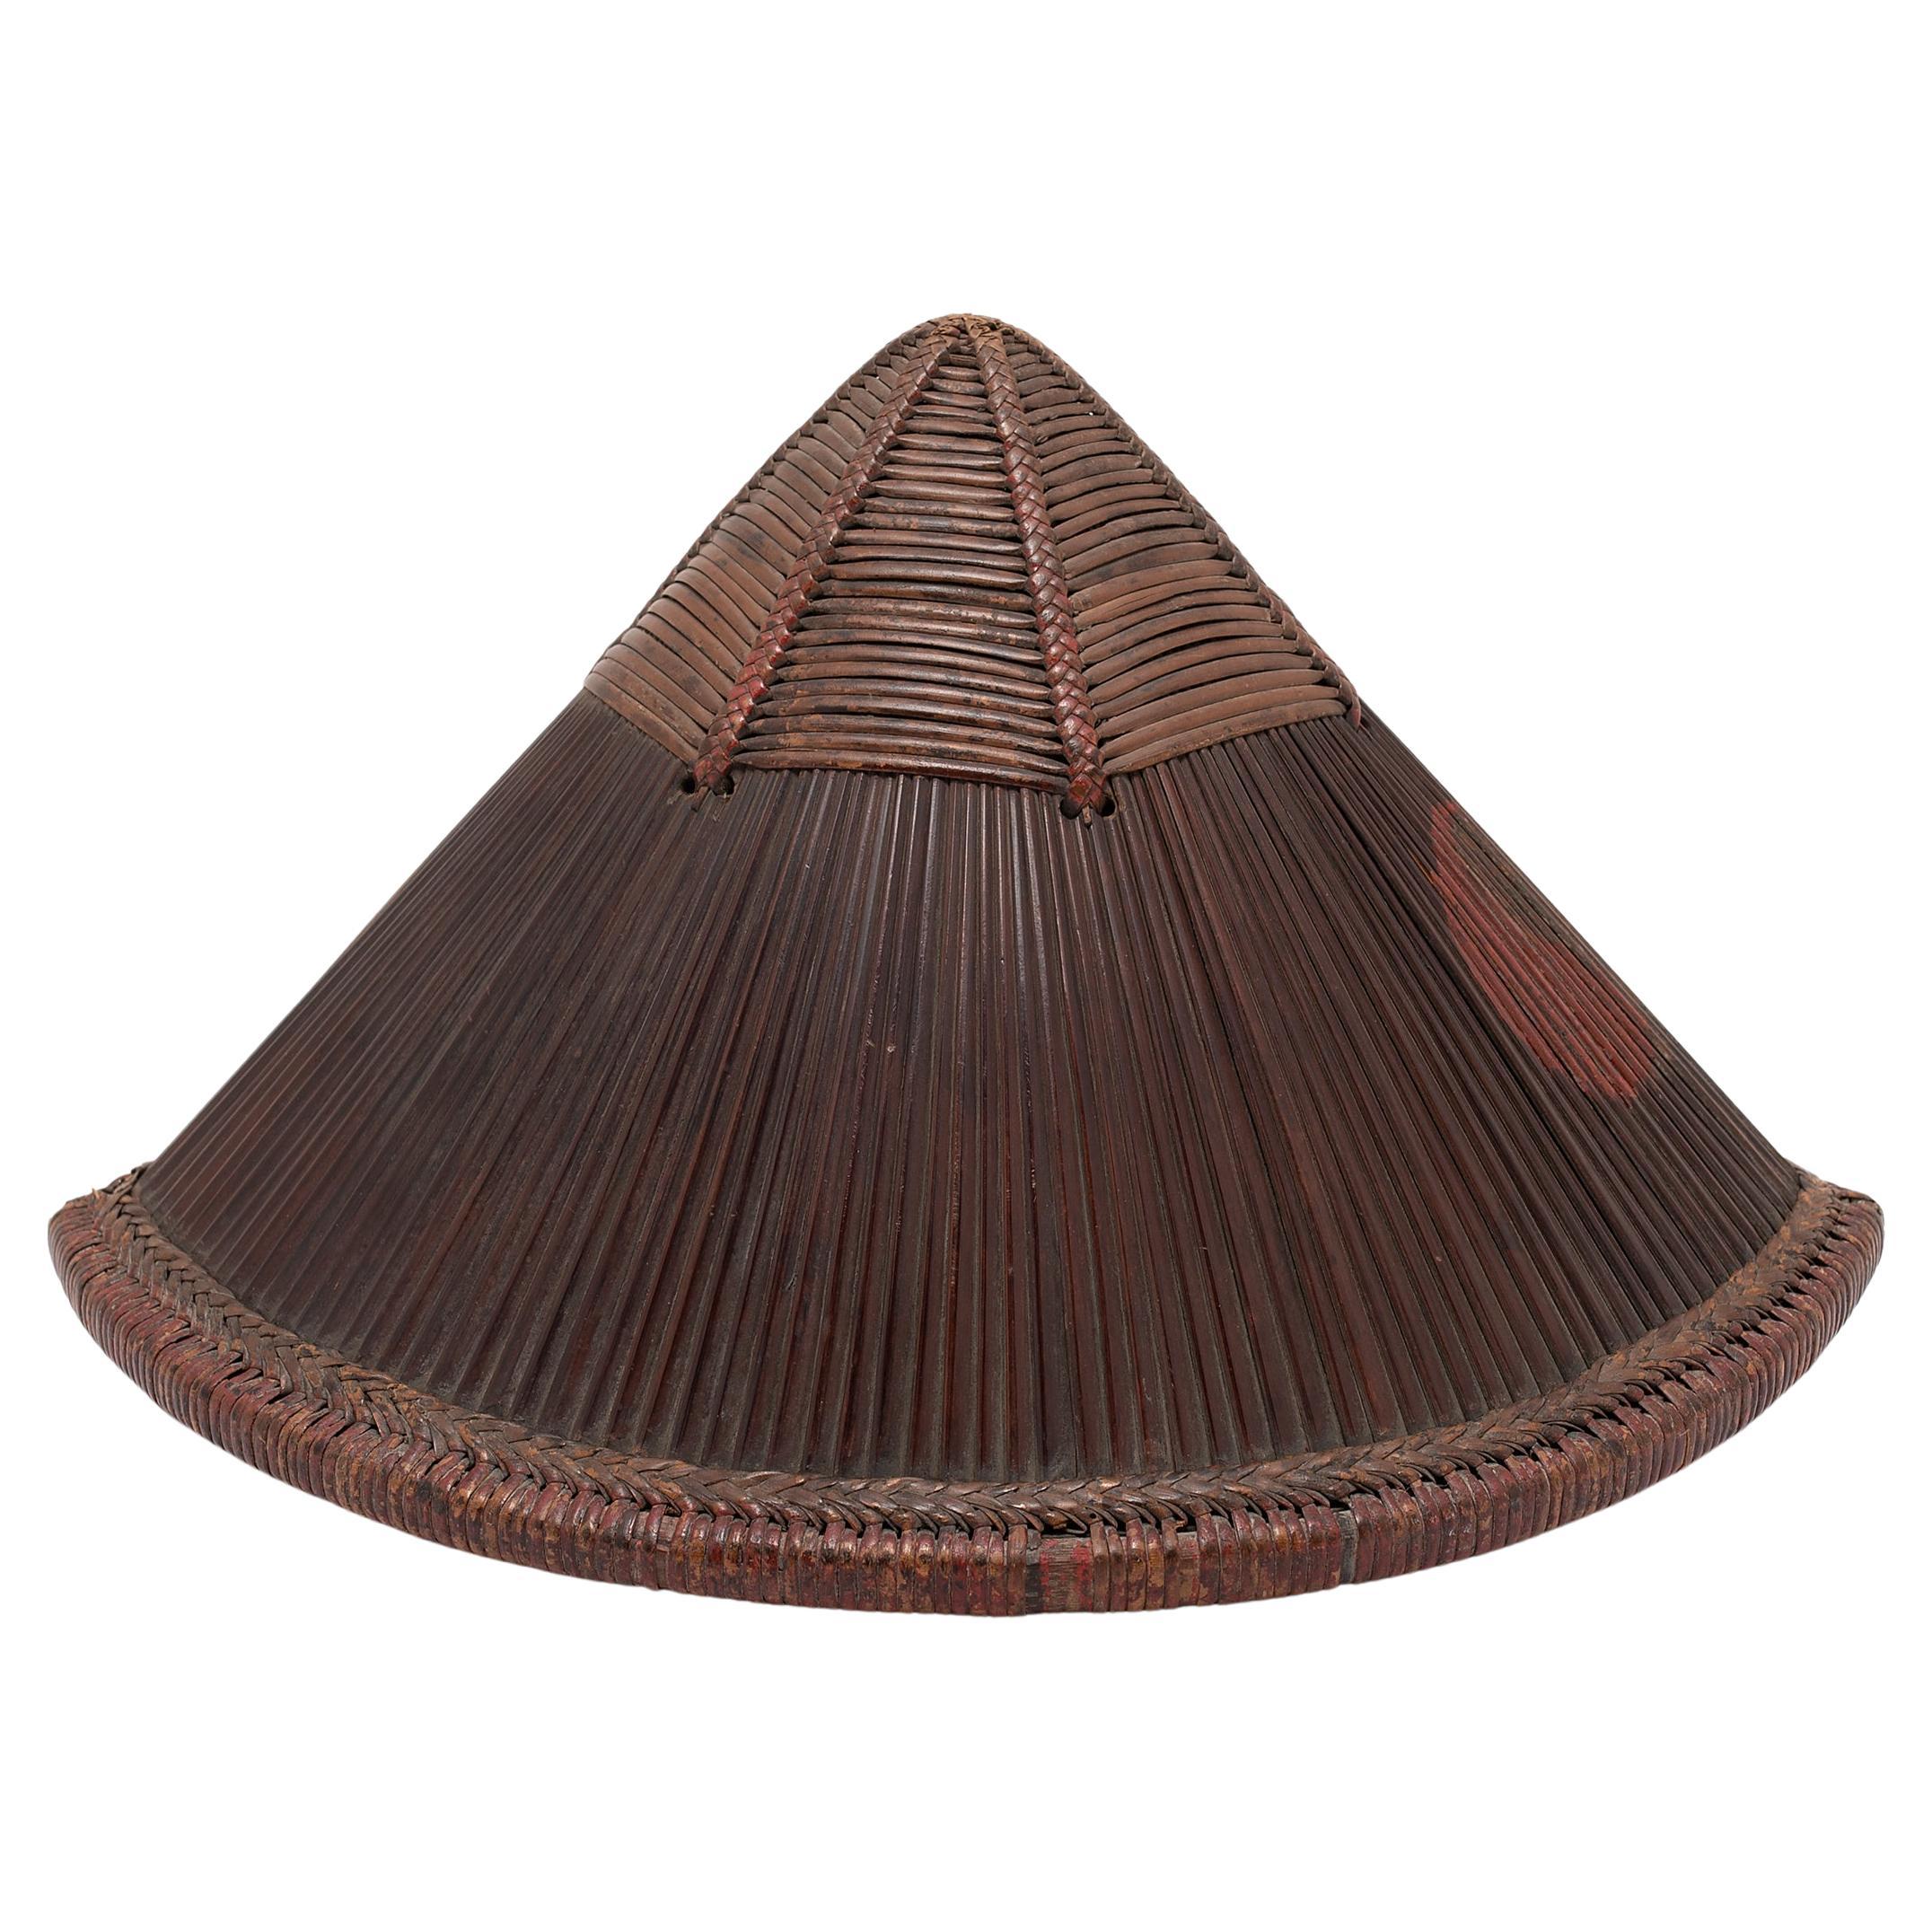 Chinese Woven Bamboo Foot Soldier's Helmet, c. 1800 For Sale